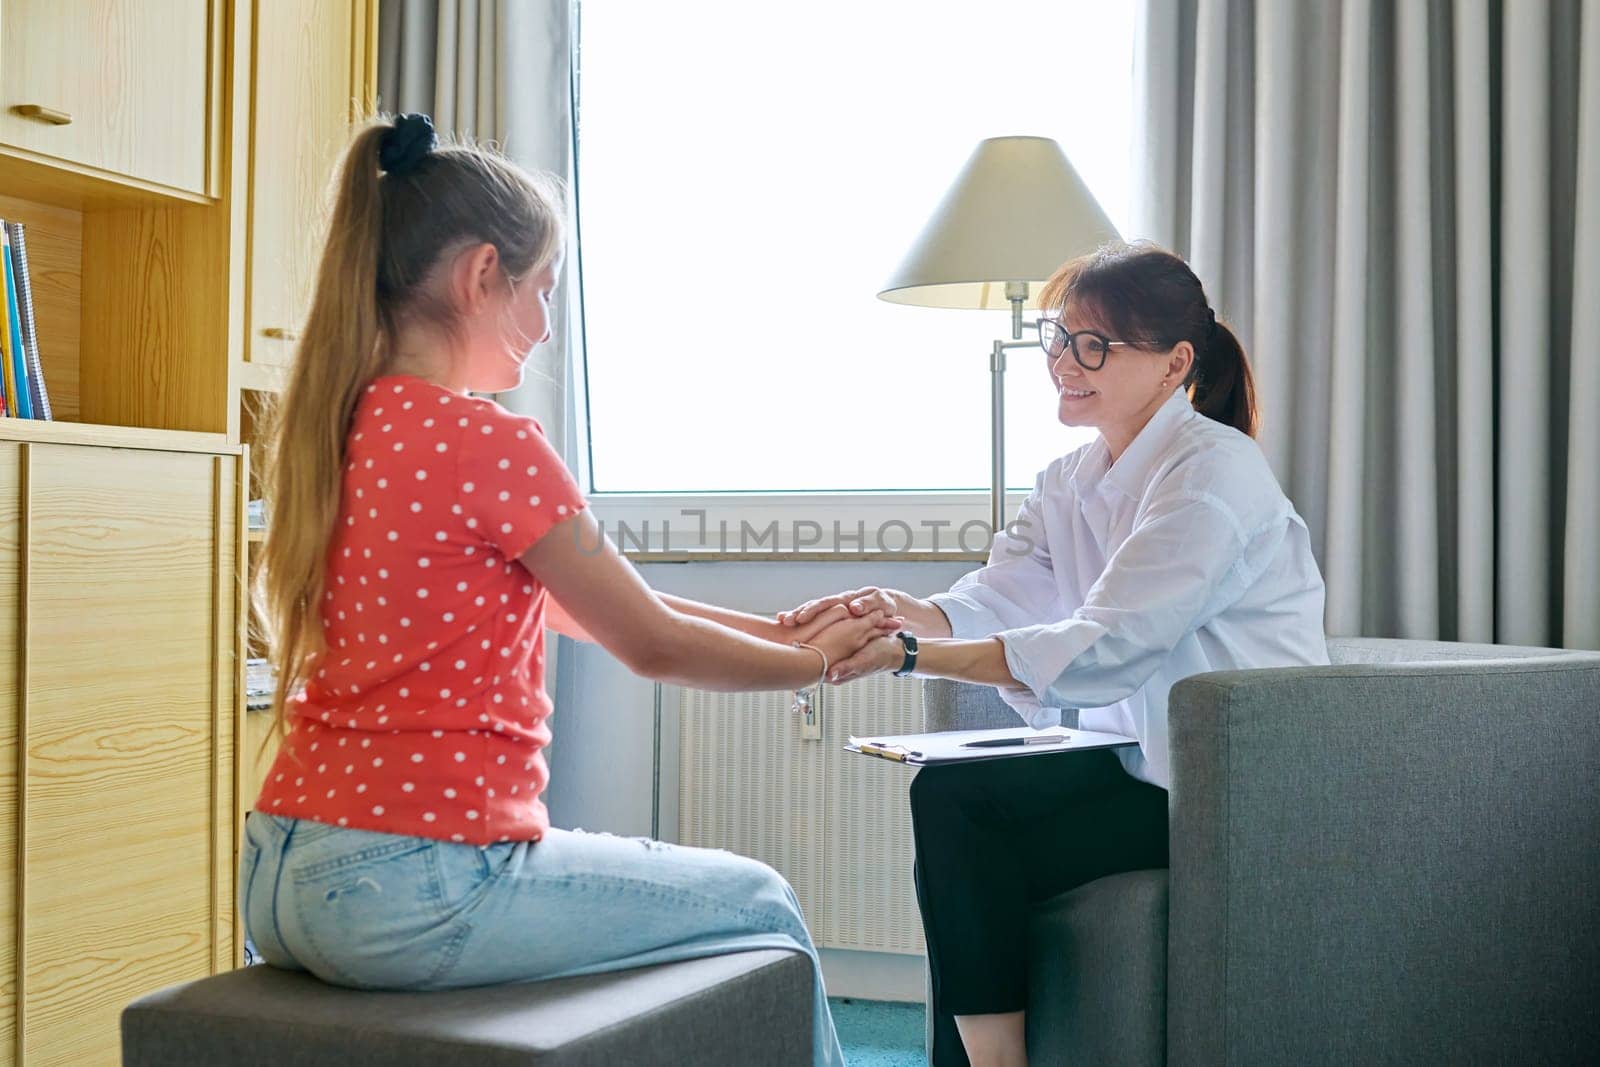 Girl child 10 years old at therapy session with psychologist. School counselor talking to child, listening, helping with problem. Mental health, childhood, schoolchildren, psychology, psychotherapy